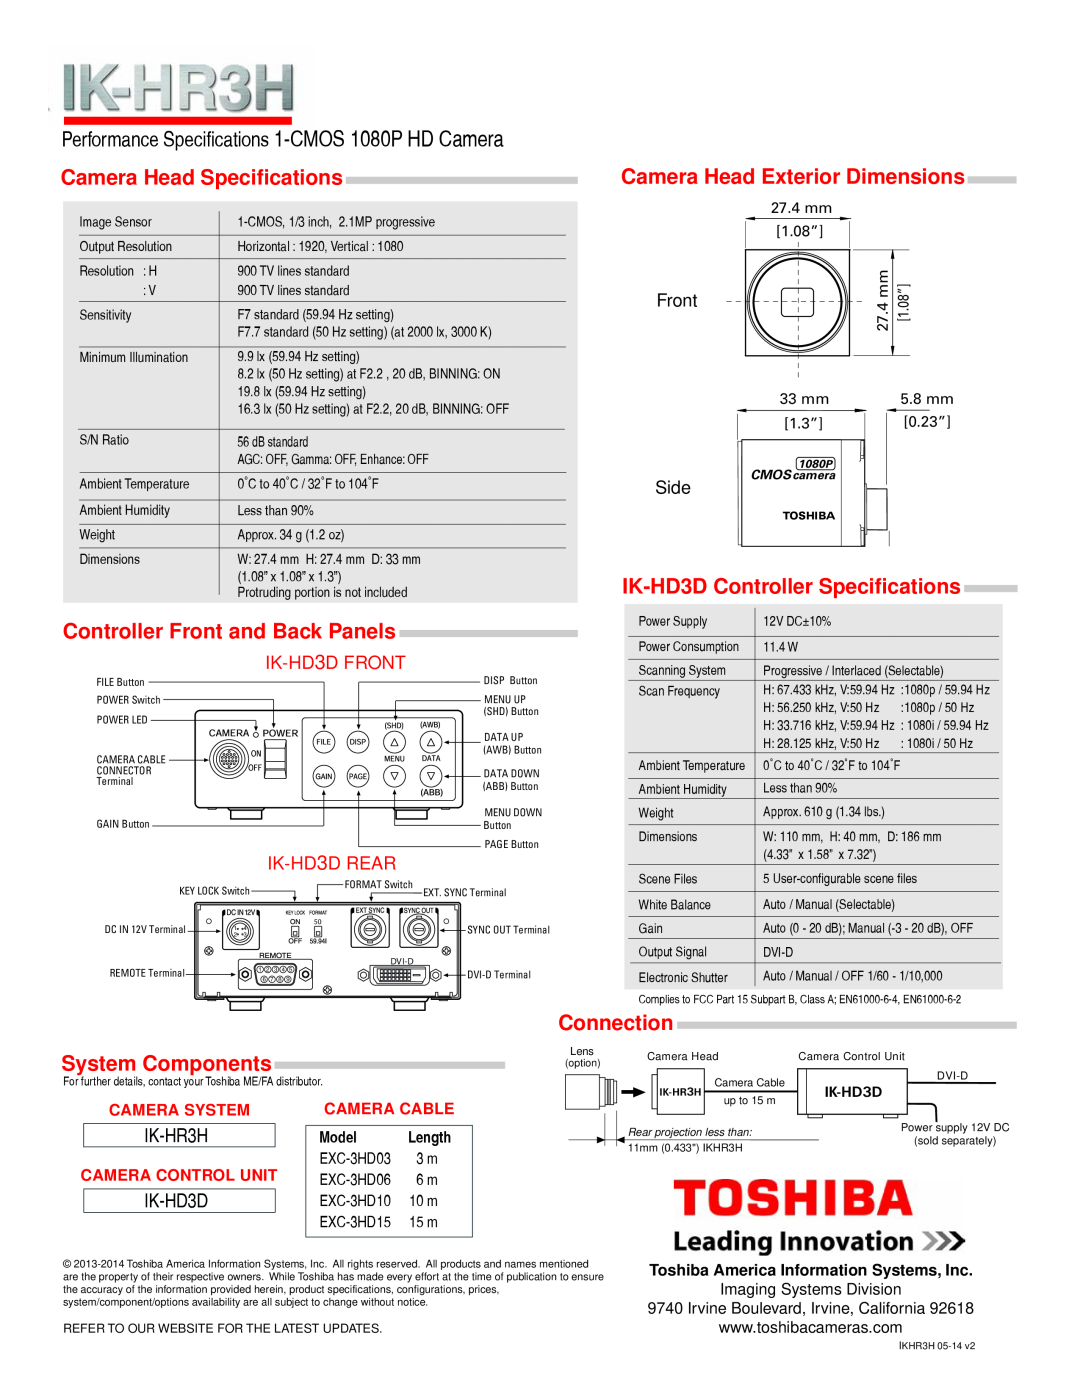 Toshiba IK-HR3H Performance Specifications 1-CMOS 1080P HD Camera, Camera Head Specifications, Connection, IK-HD3D, Front 